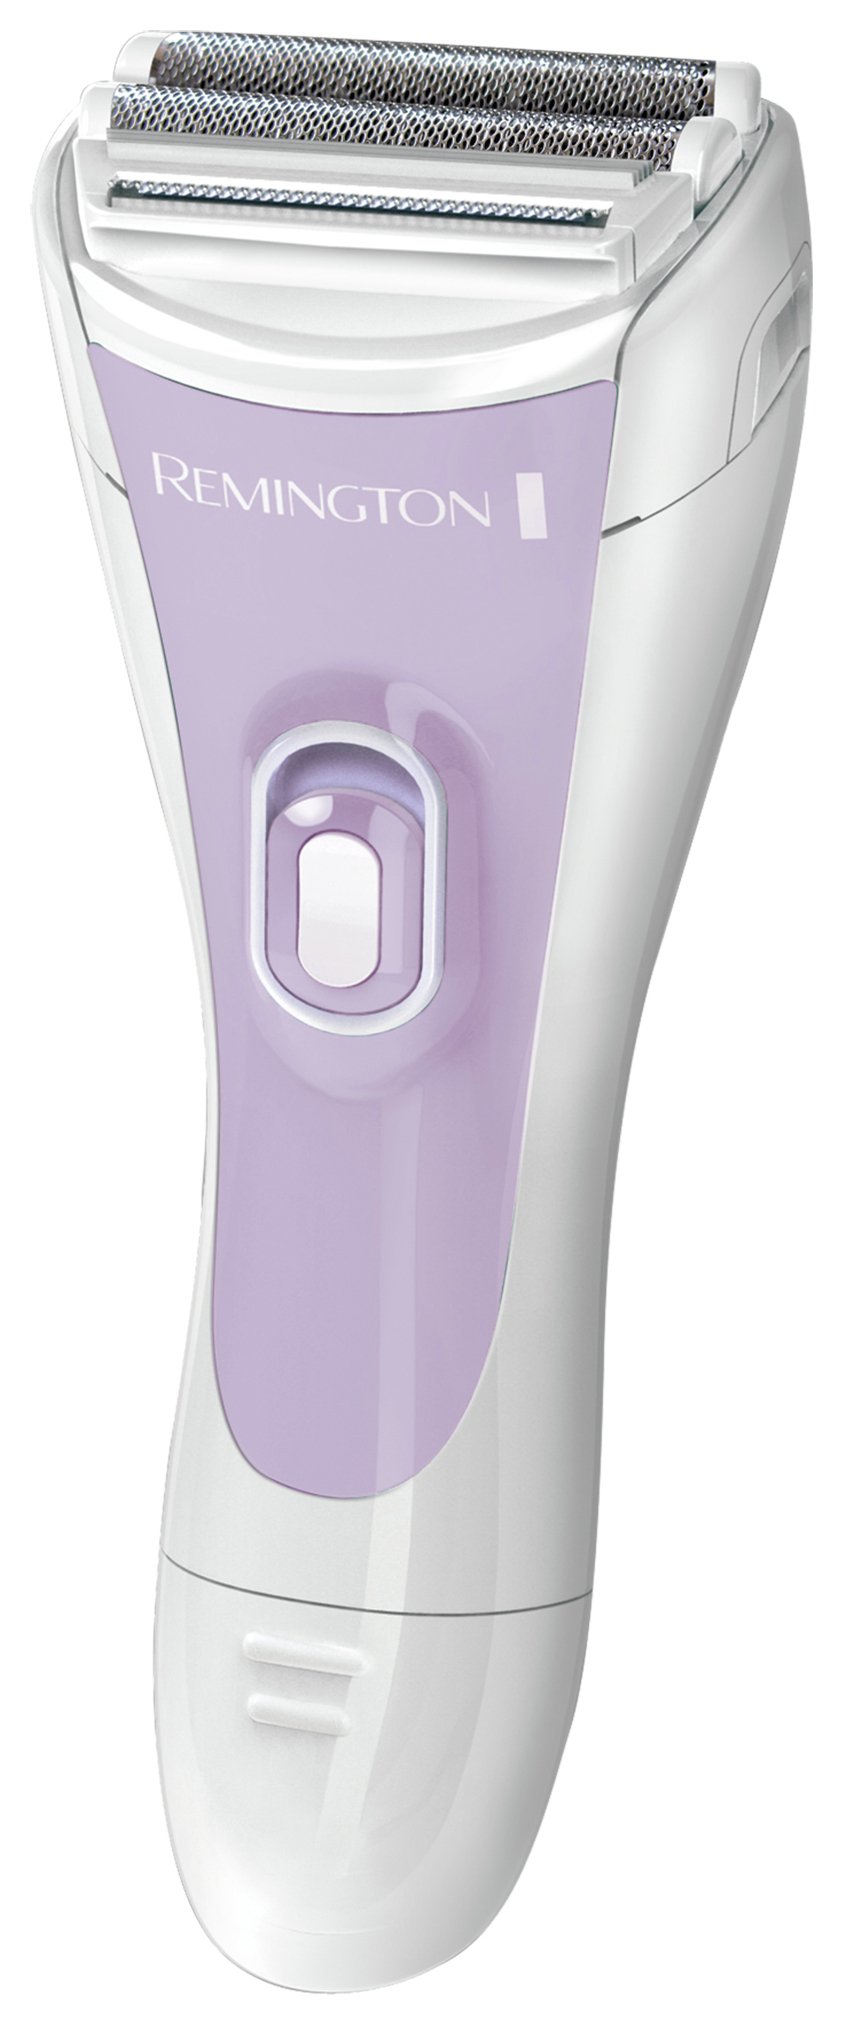 Remington Smooth & Silky Wet and Dry Cordless Lady Shaver review